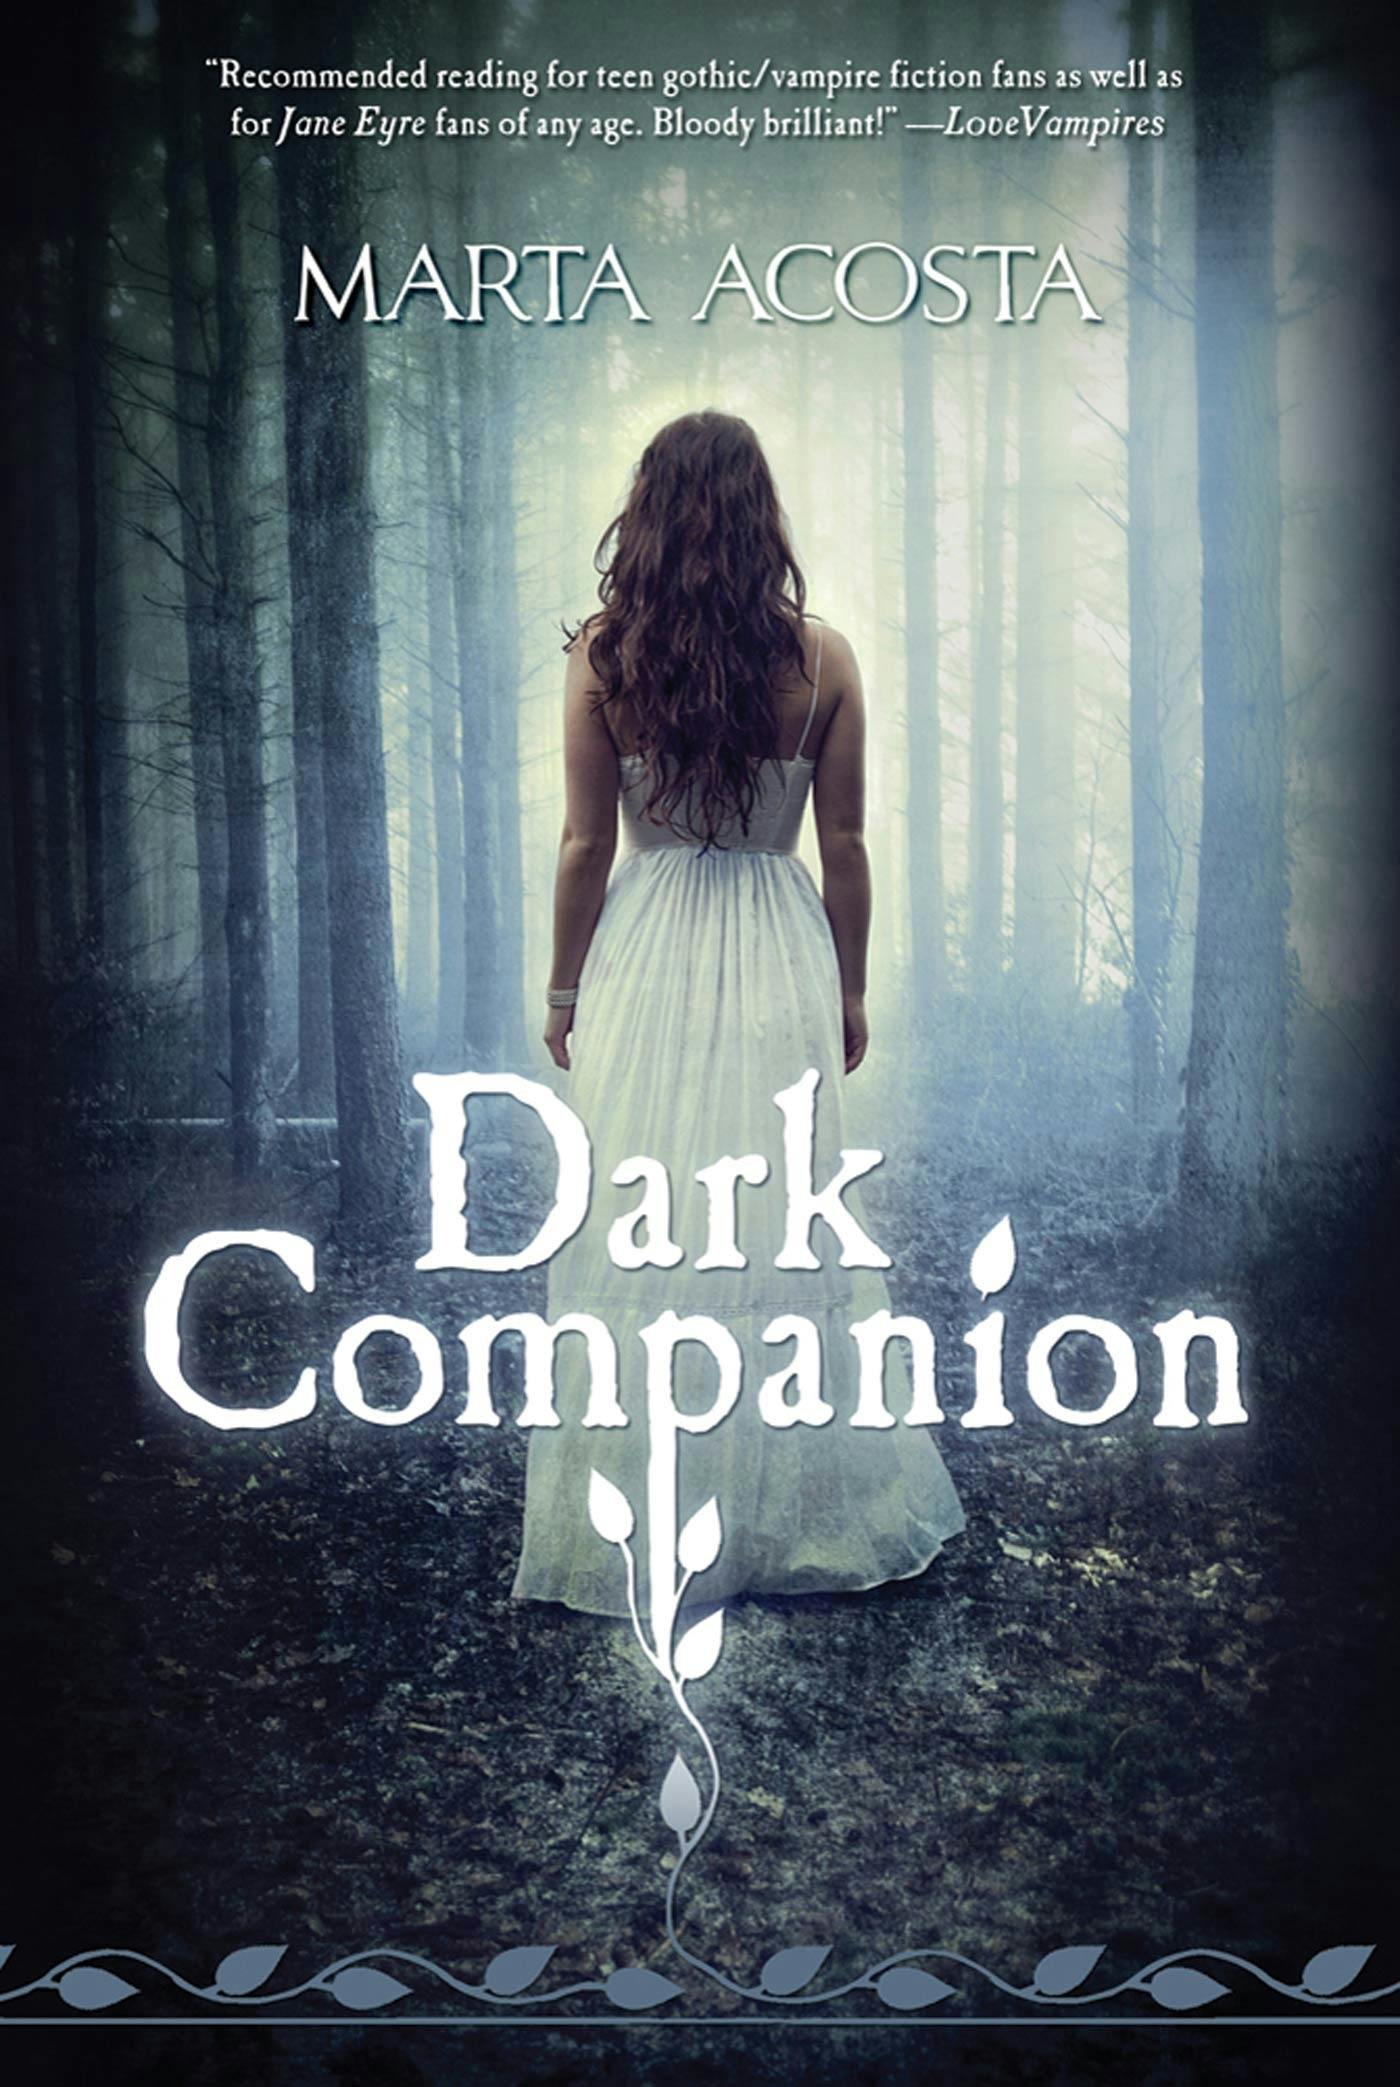 Cover for the book titled as: Dark Companion